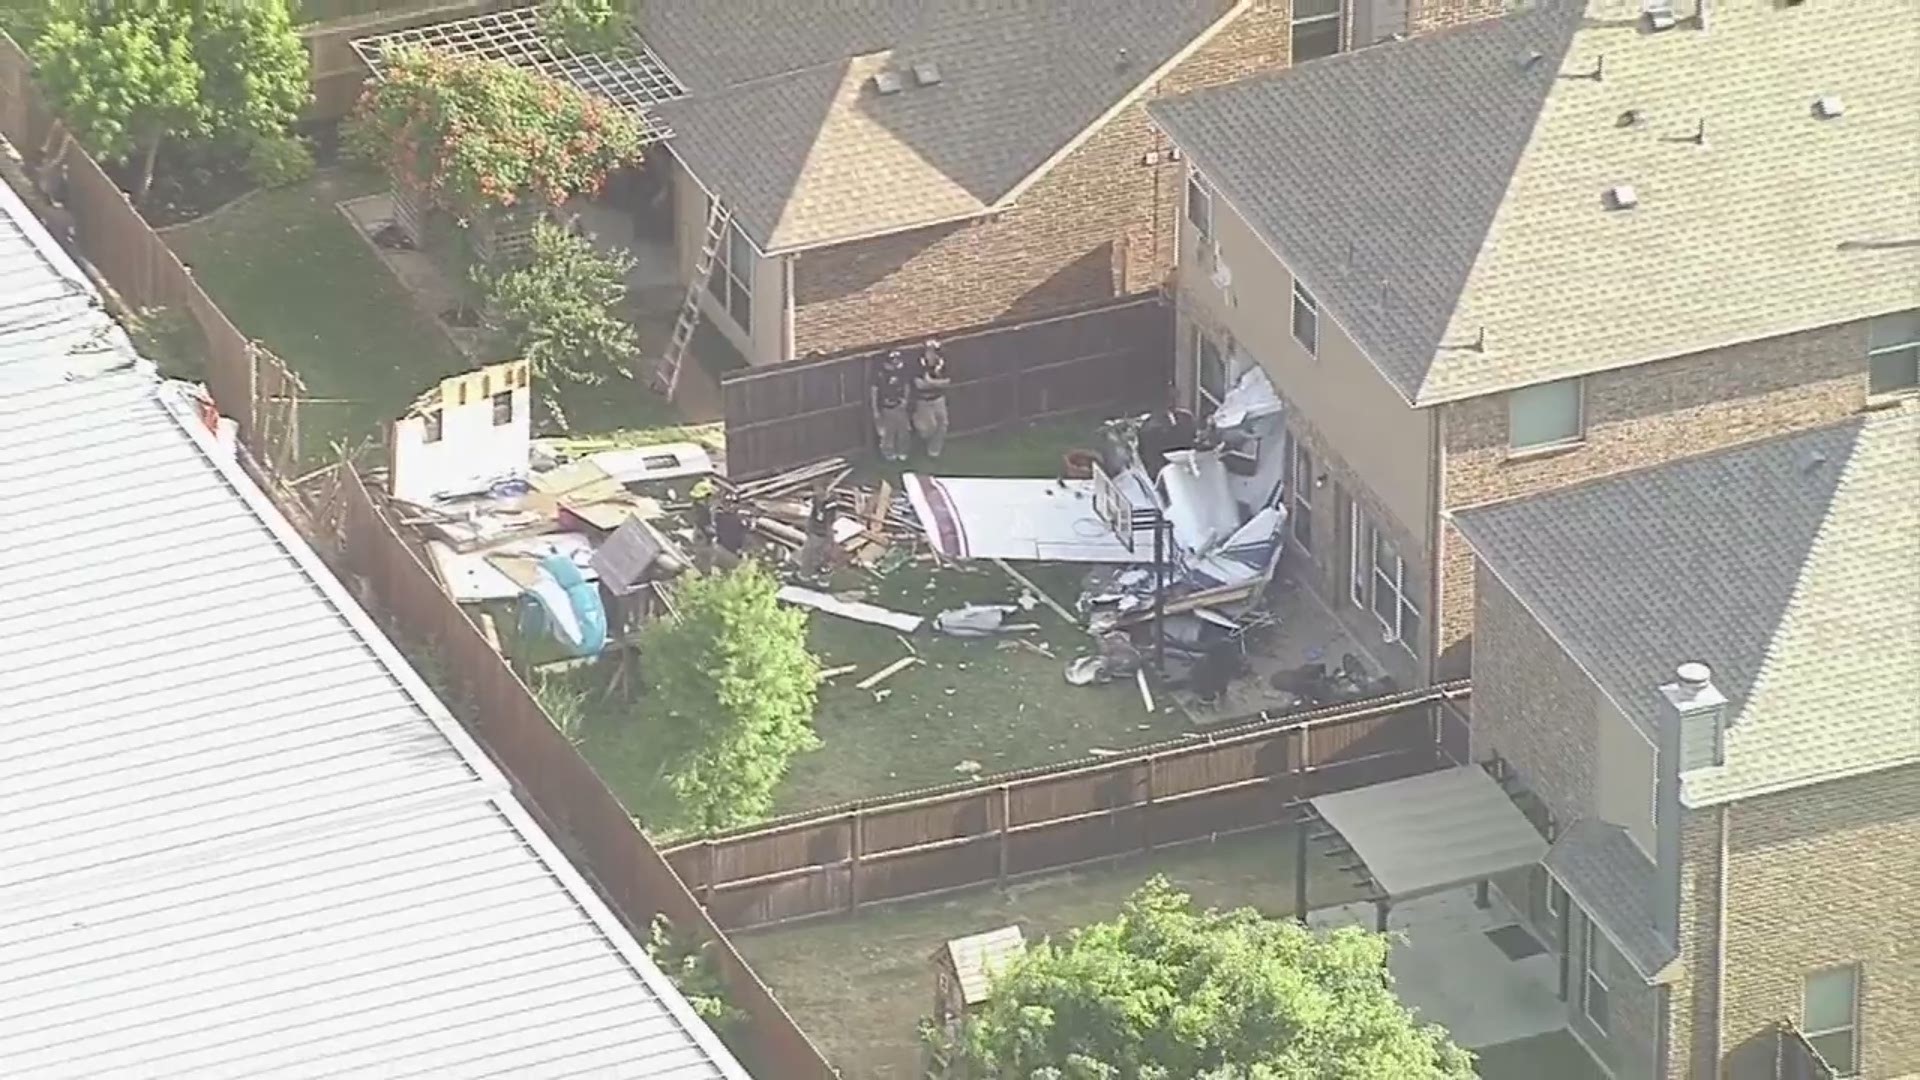 Two people were transported to area hospitals after a plane crashed Thursday evening into a McKinney home.